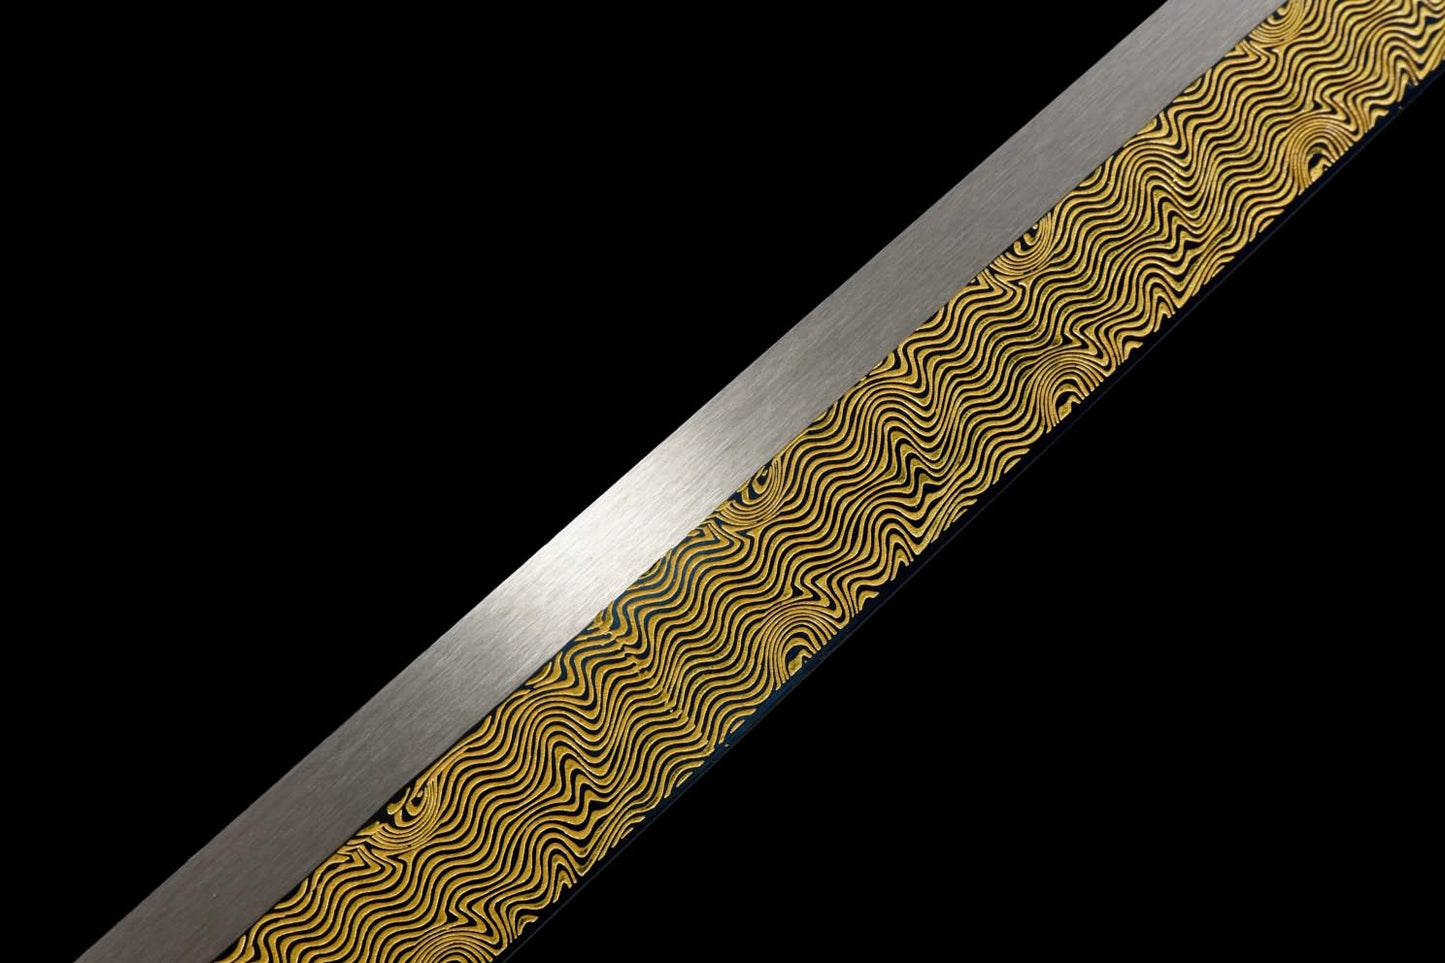 Golden Wolf Head Tang dao,Battle Ready,Hand Forged Blade,Alloy Fittings,LOONGSWORD